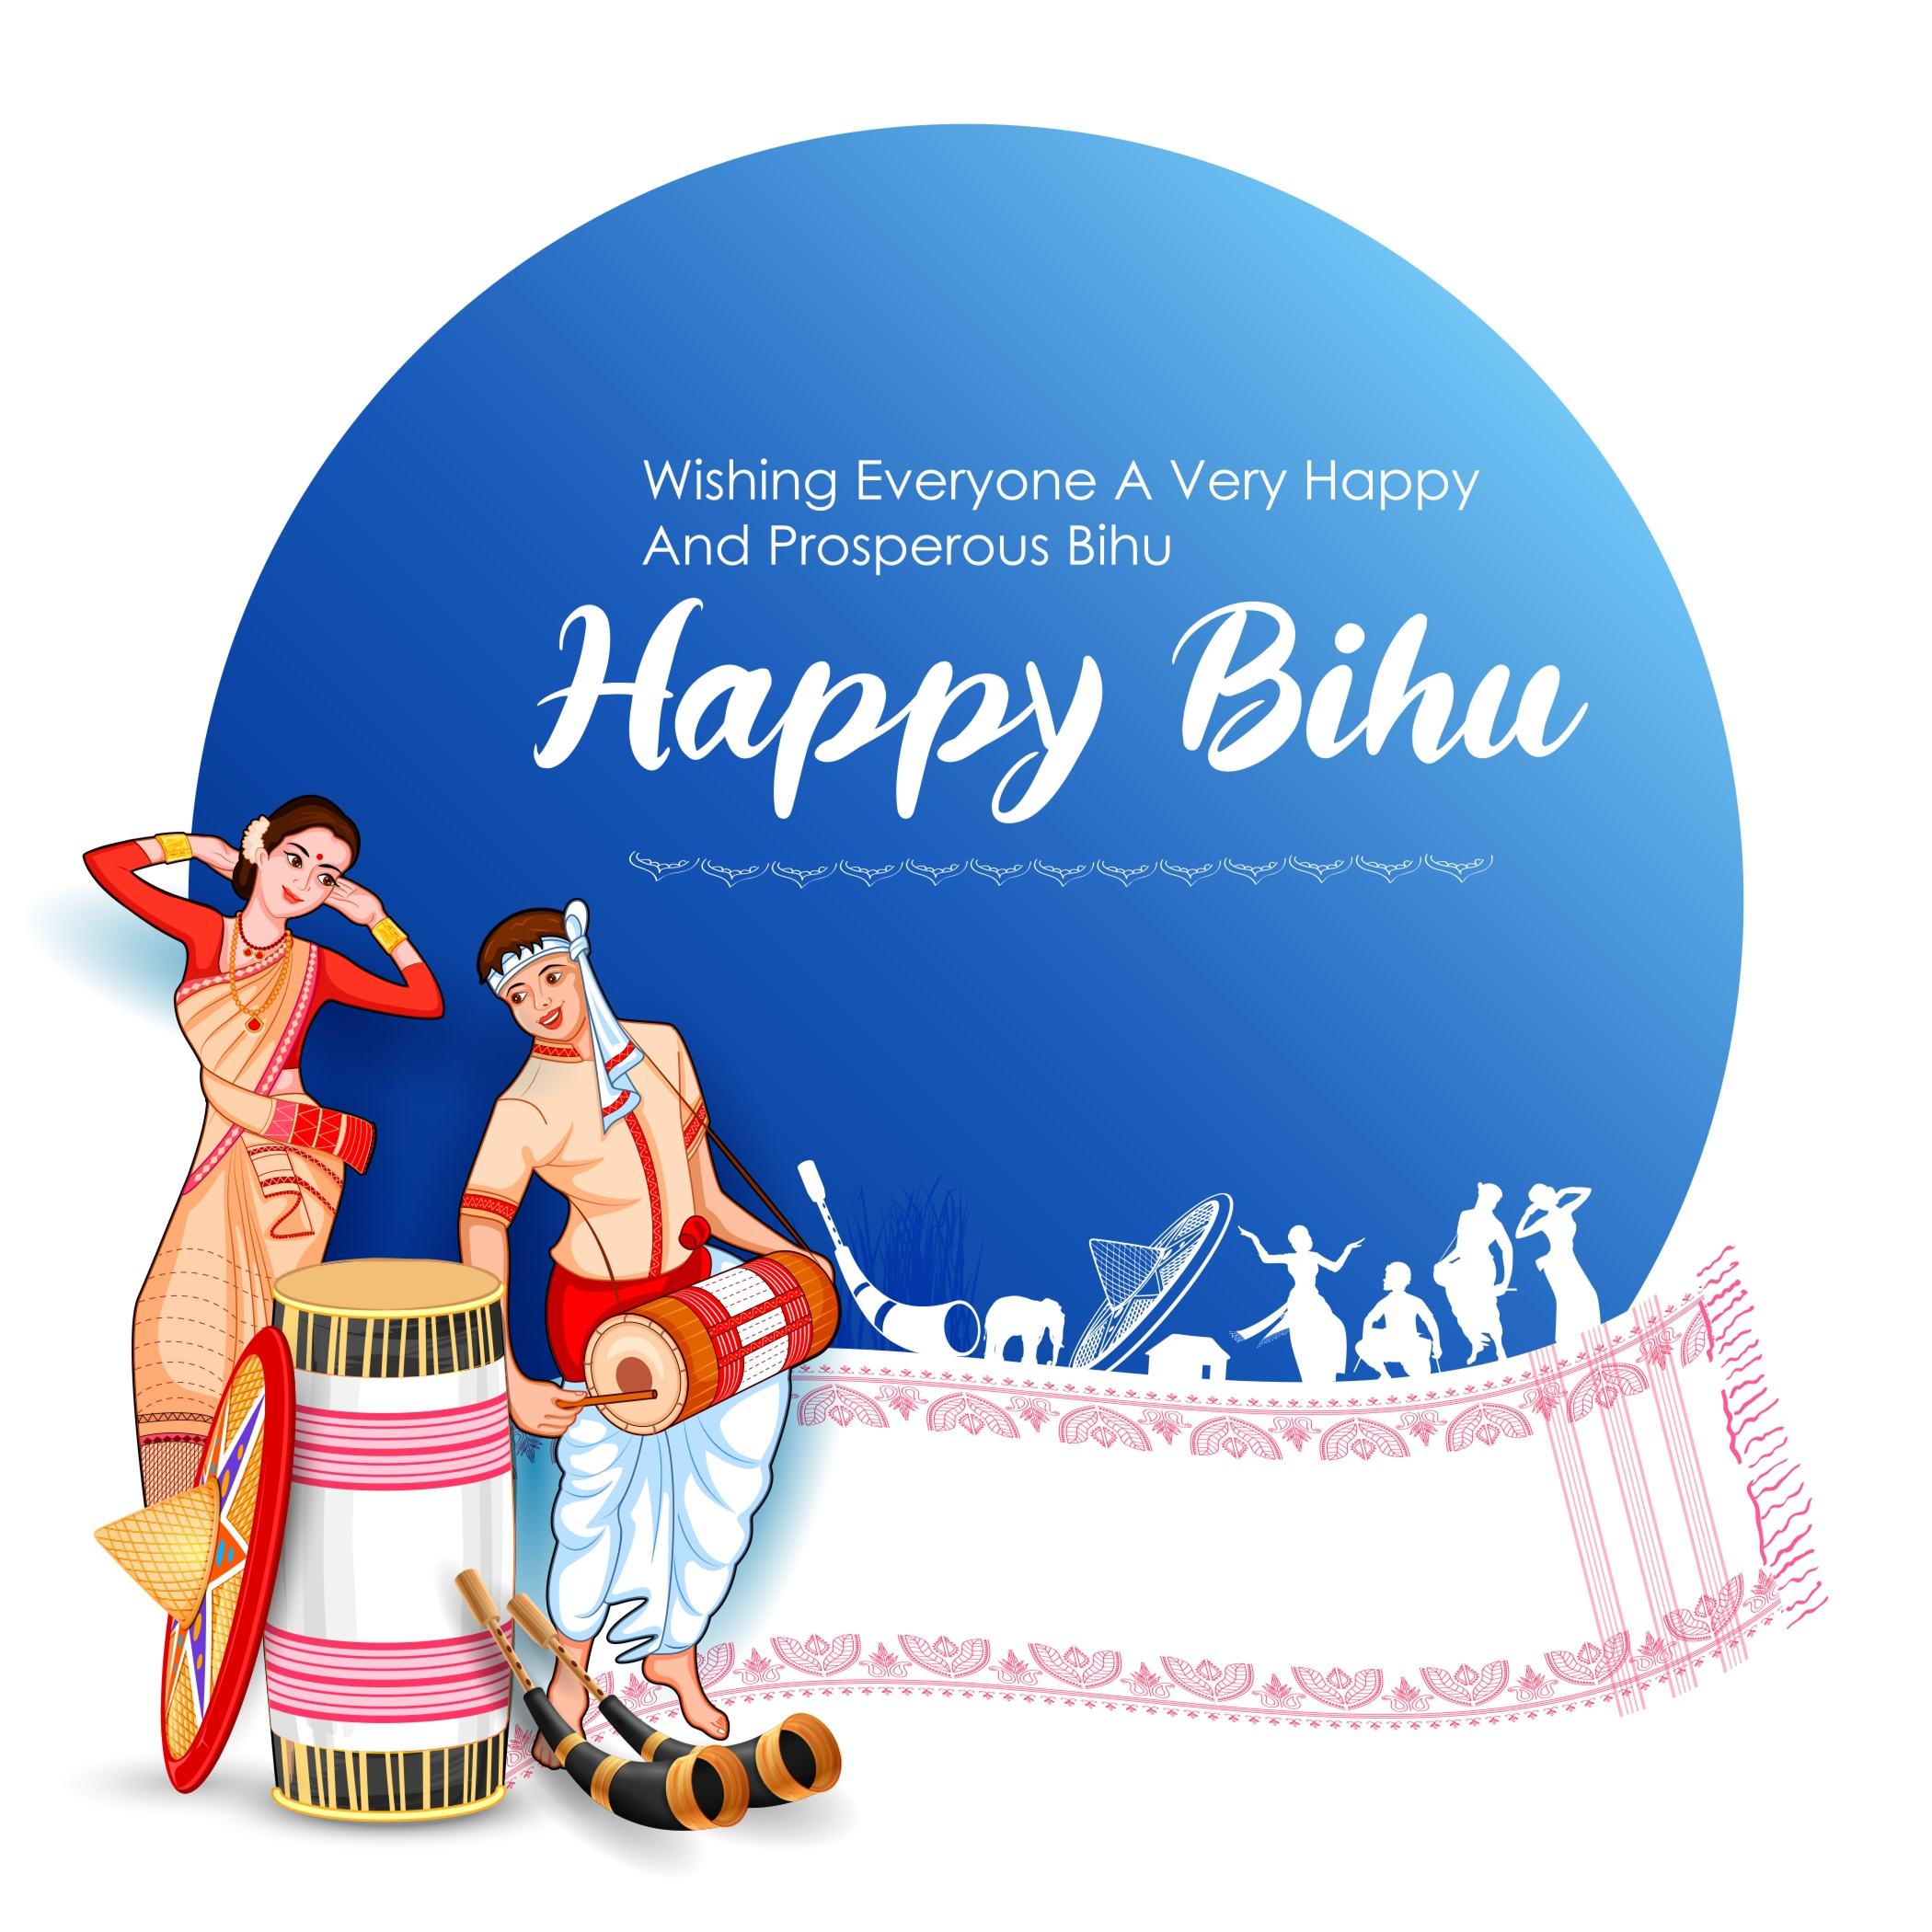 1649831950 533 Happy Bohag Bihu 2022 Wishes Images Status Quotes Messages and